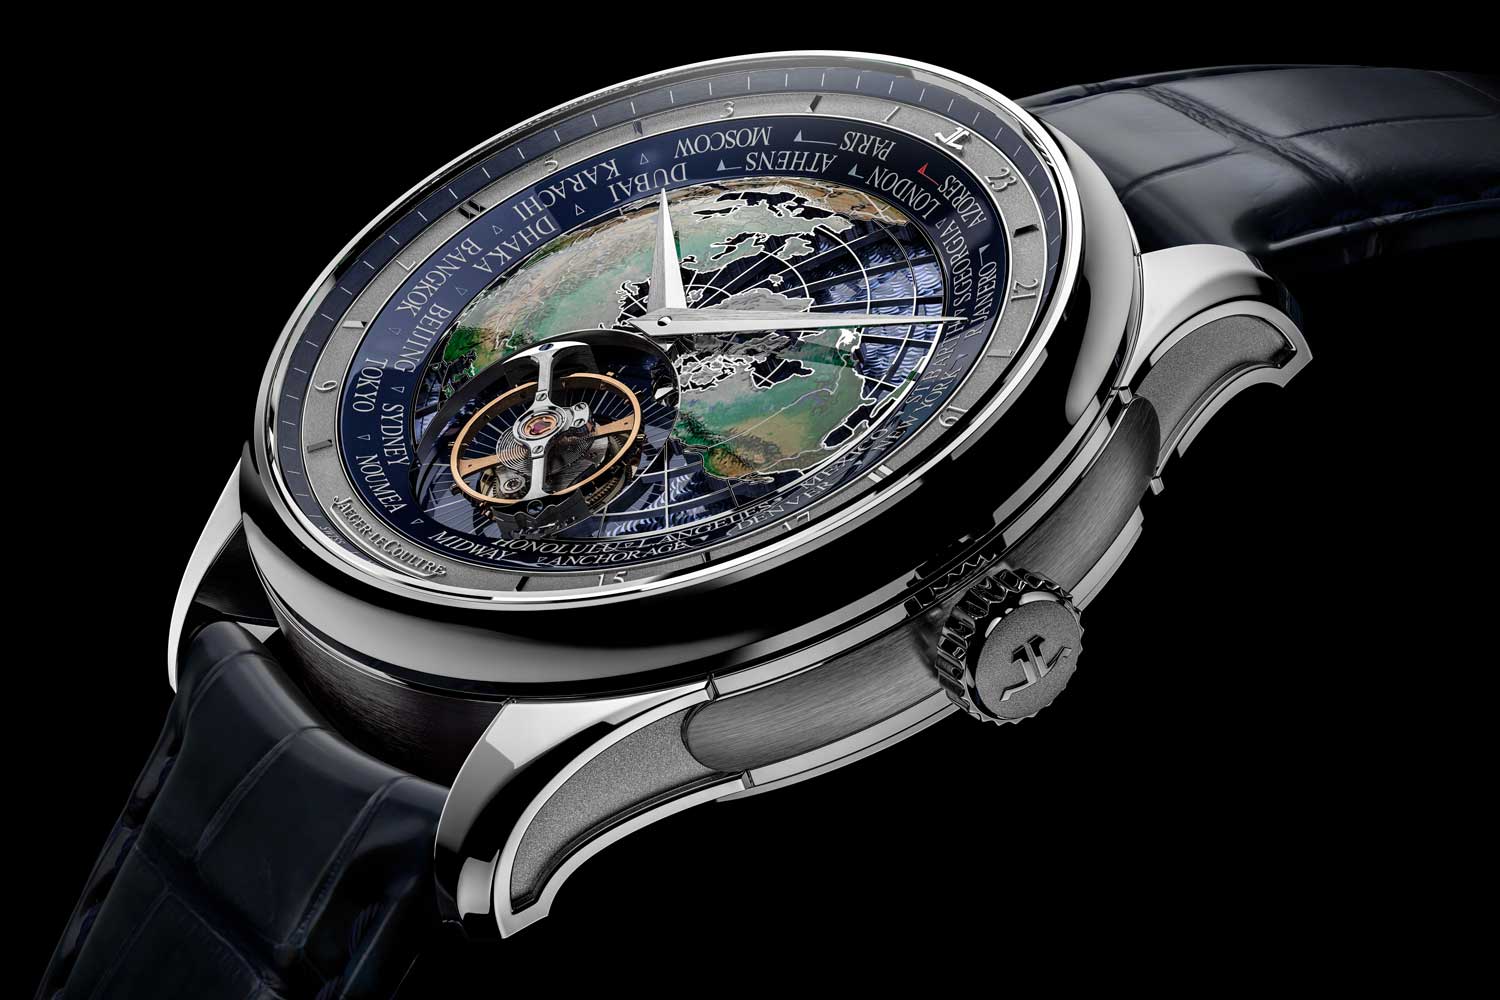 The dial the Master Grande Tradition Caliber 948 was created by artisans at the manufacture’s Métiers Rares atelier